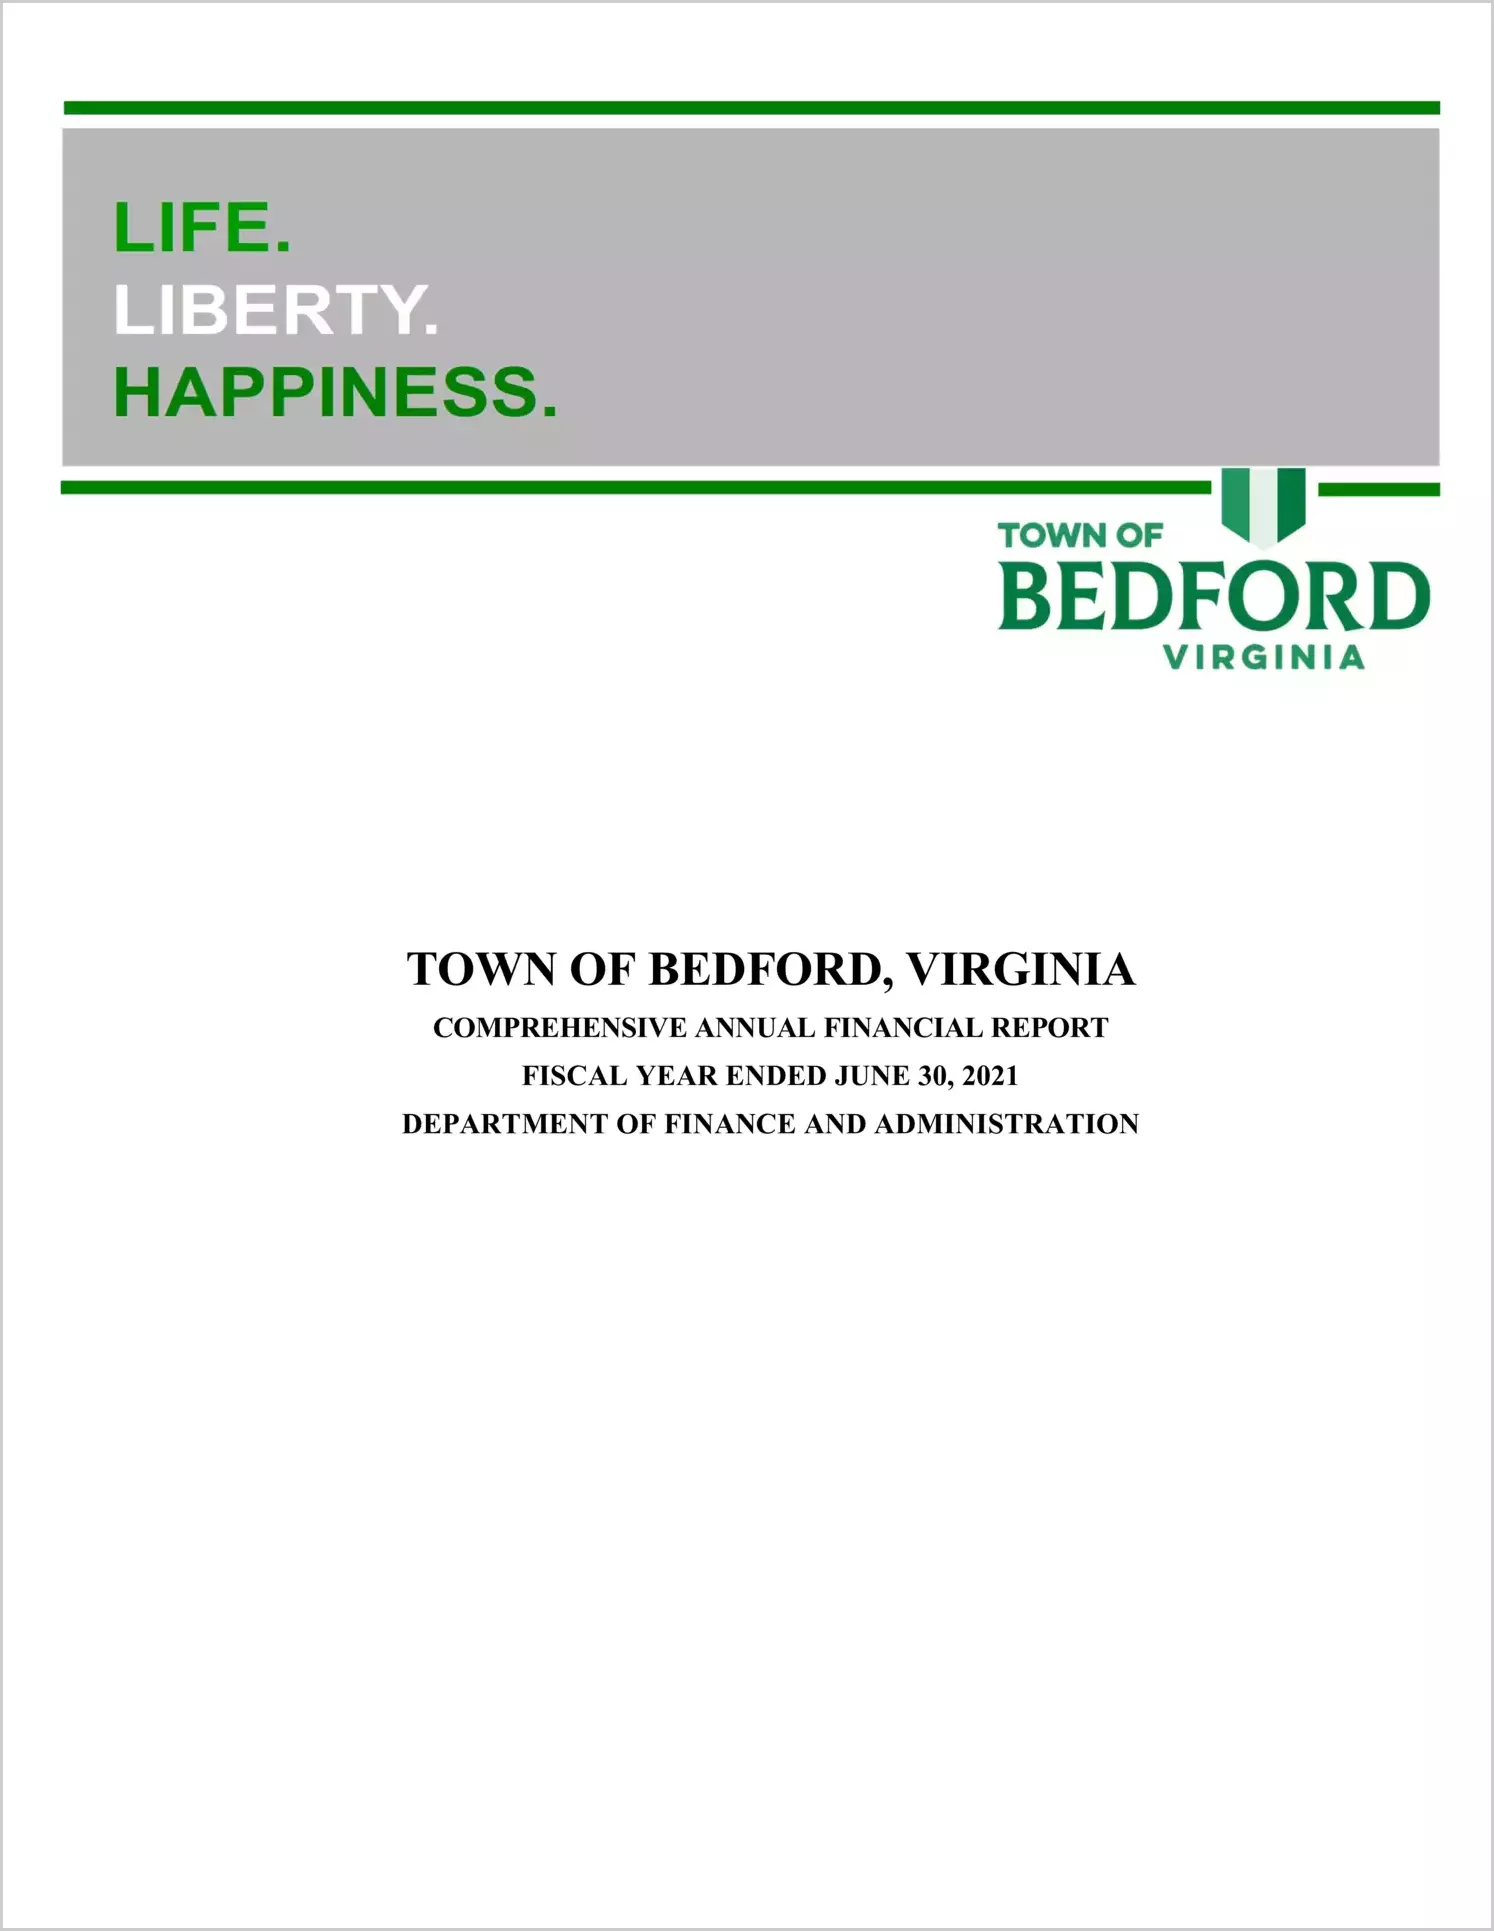 2021 Annual Financial Report for Town of Bedford